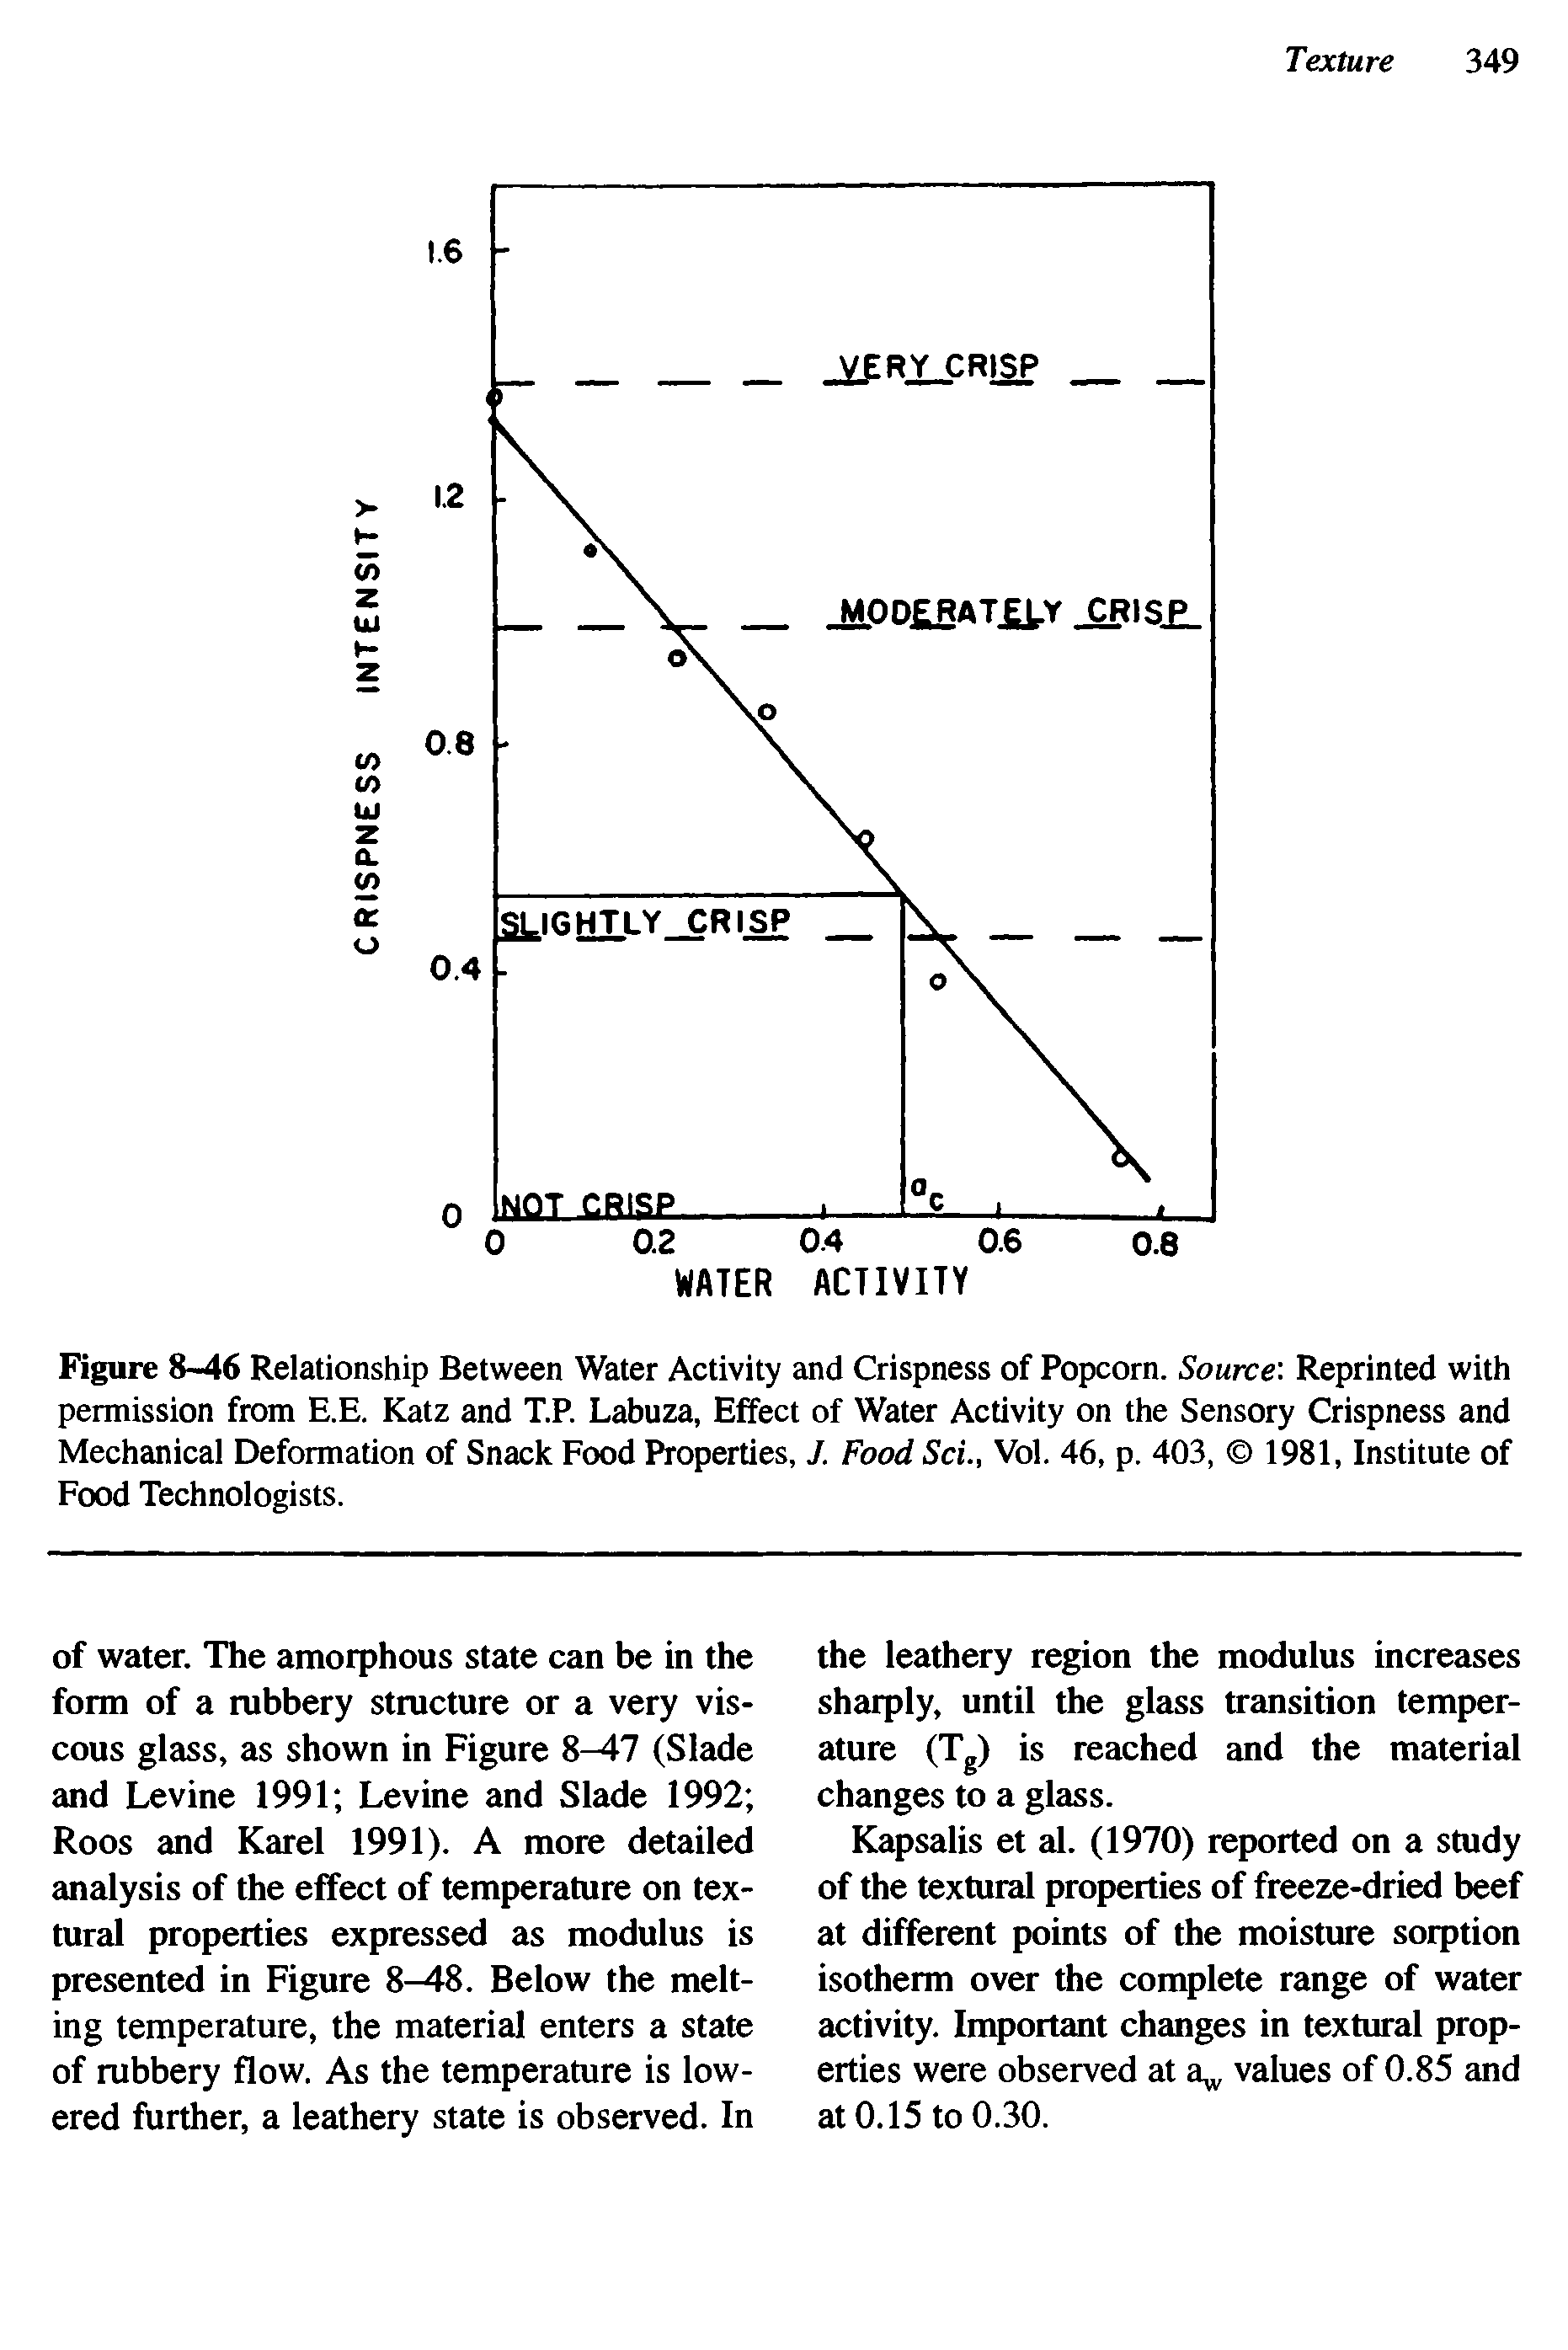 Figure 8-46 Relationship Between Water Activity and Crispness of Popcorn. Source. Reprinted with permission from E.E. Katz and T.P. Labuza, Effect of Water Activity on the Sensory Crispness and Mechanical Deformation of Snack Food Properties, J. Food Sci., Vol. 46, p. 403, 1981, Institute of Food Technologists.